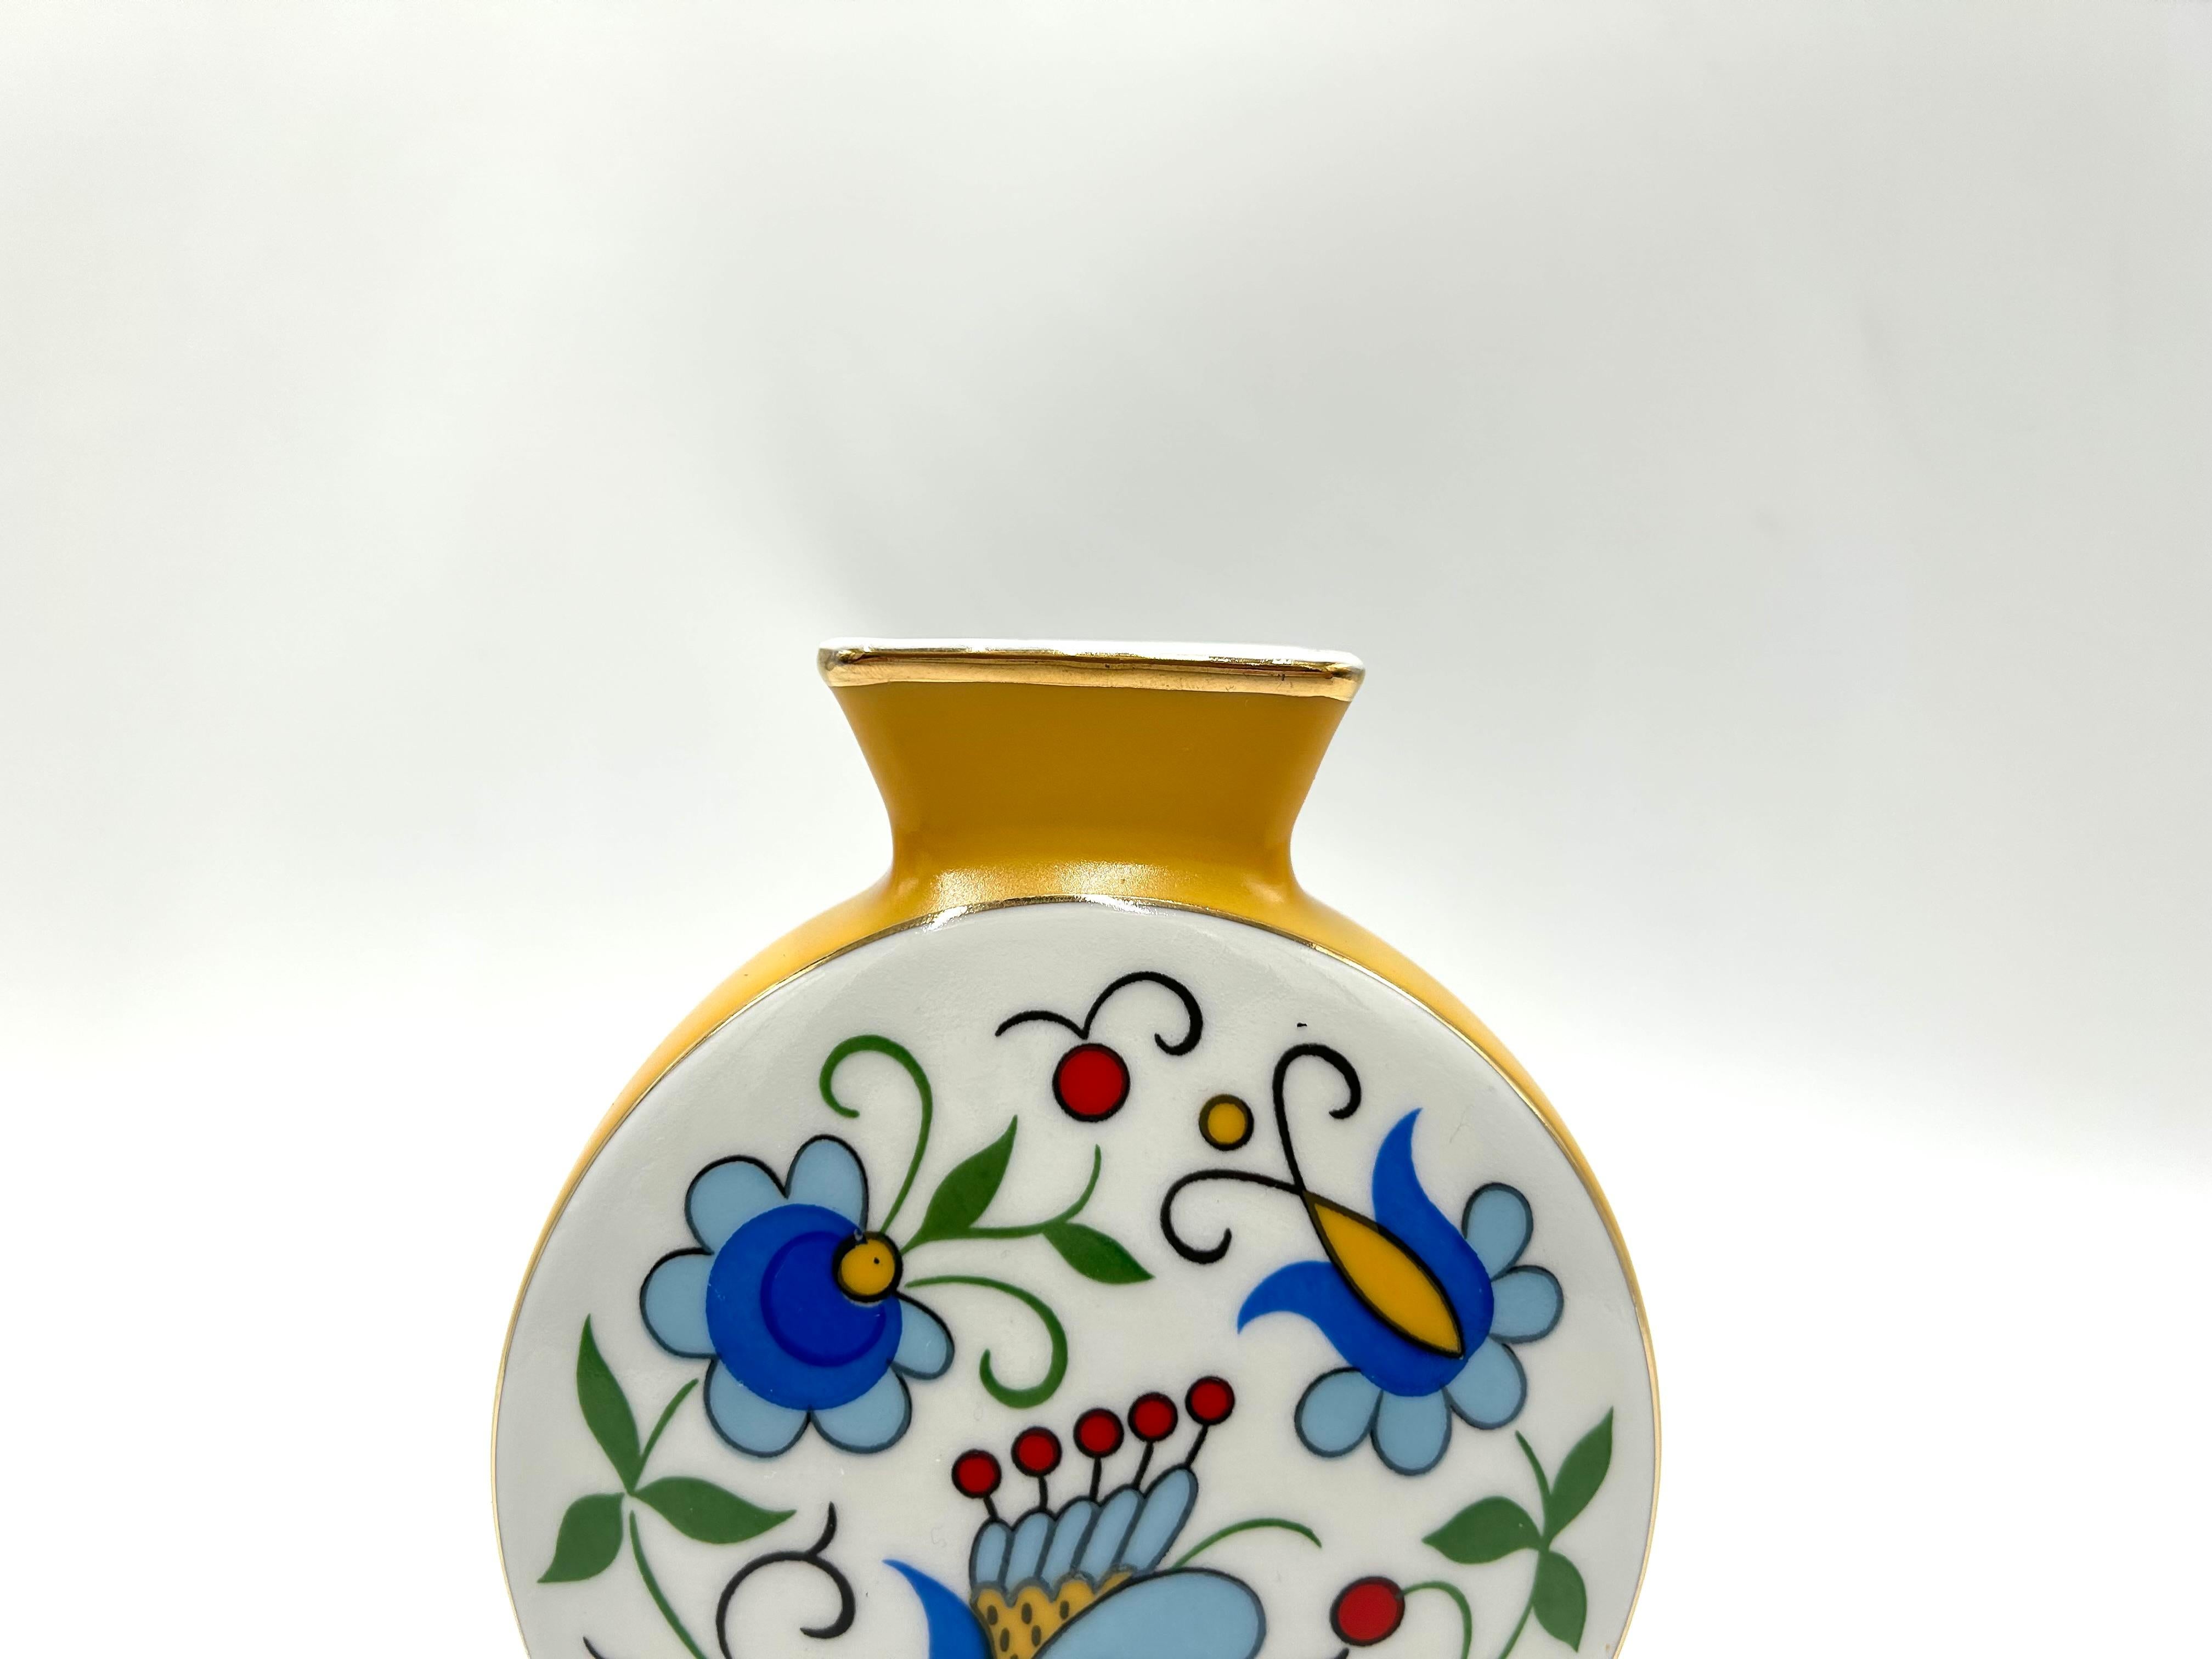 Vase with Folk Patterns, Lubiana, Poland, 1970s For Sale 1